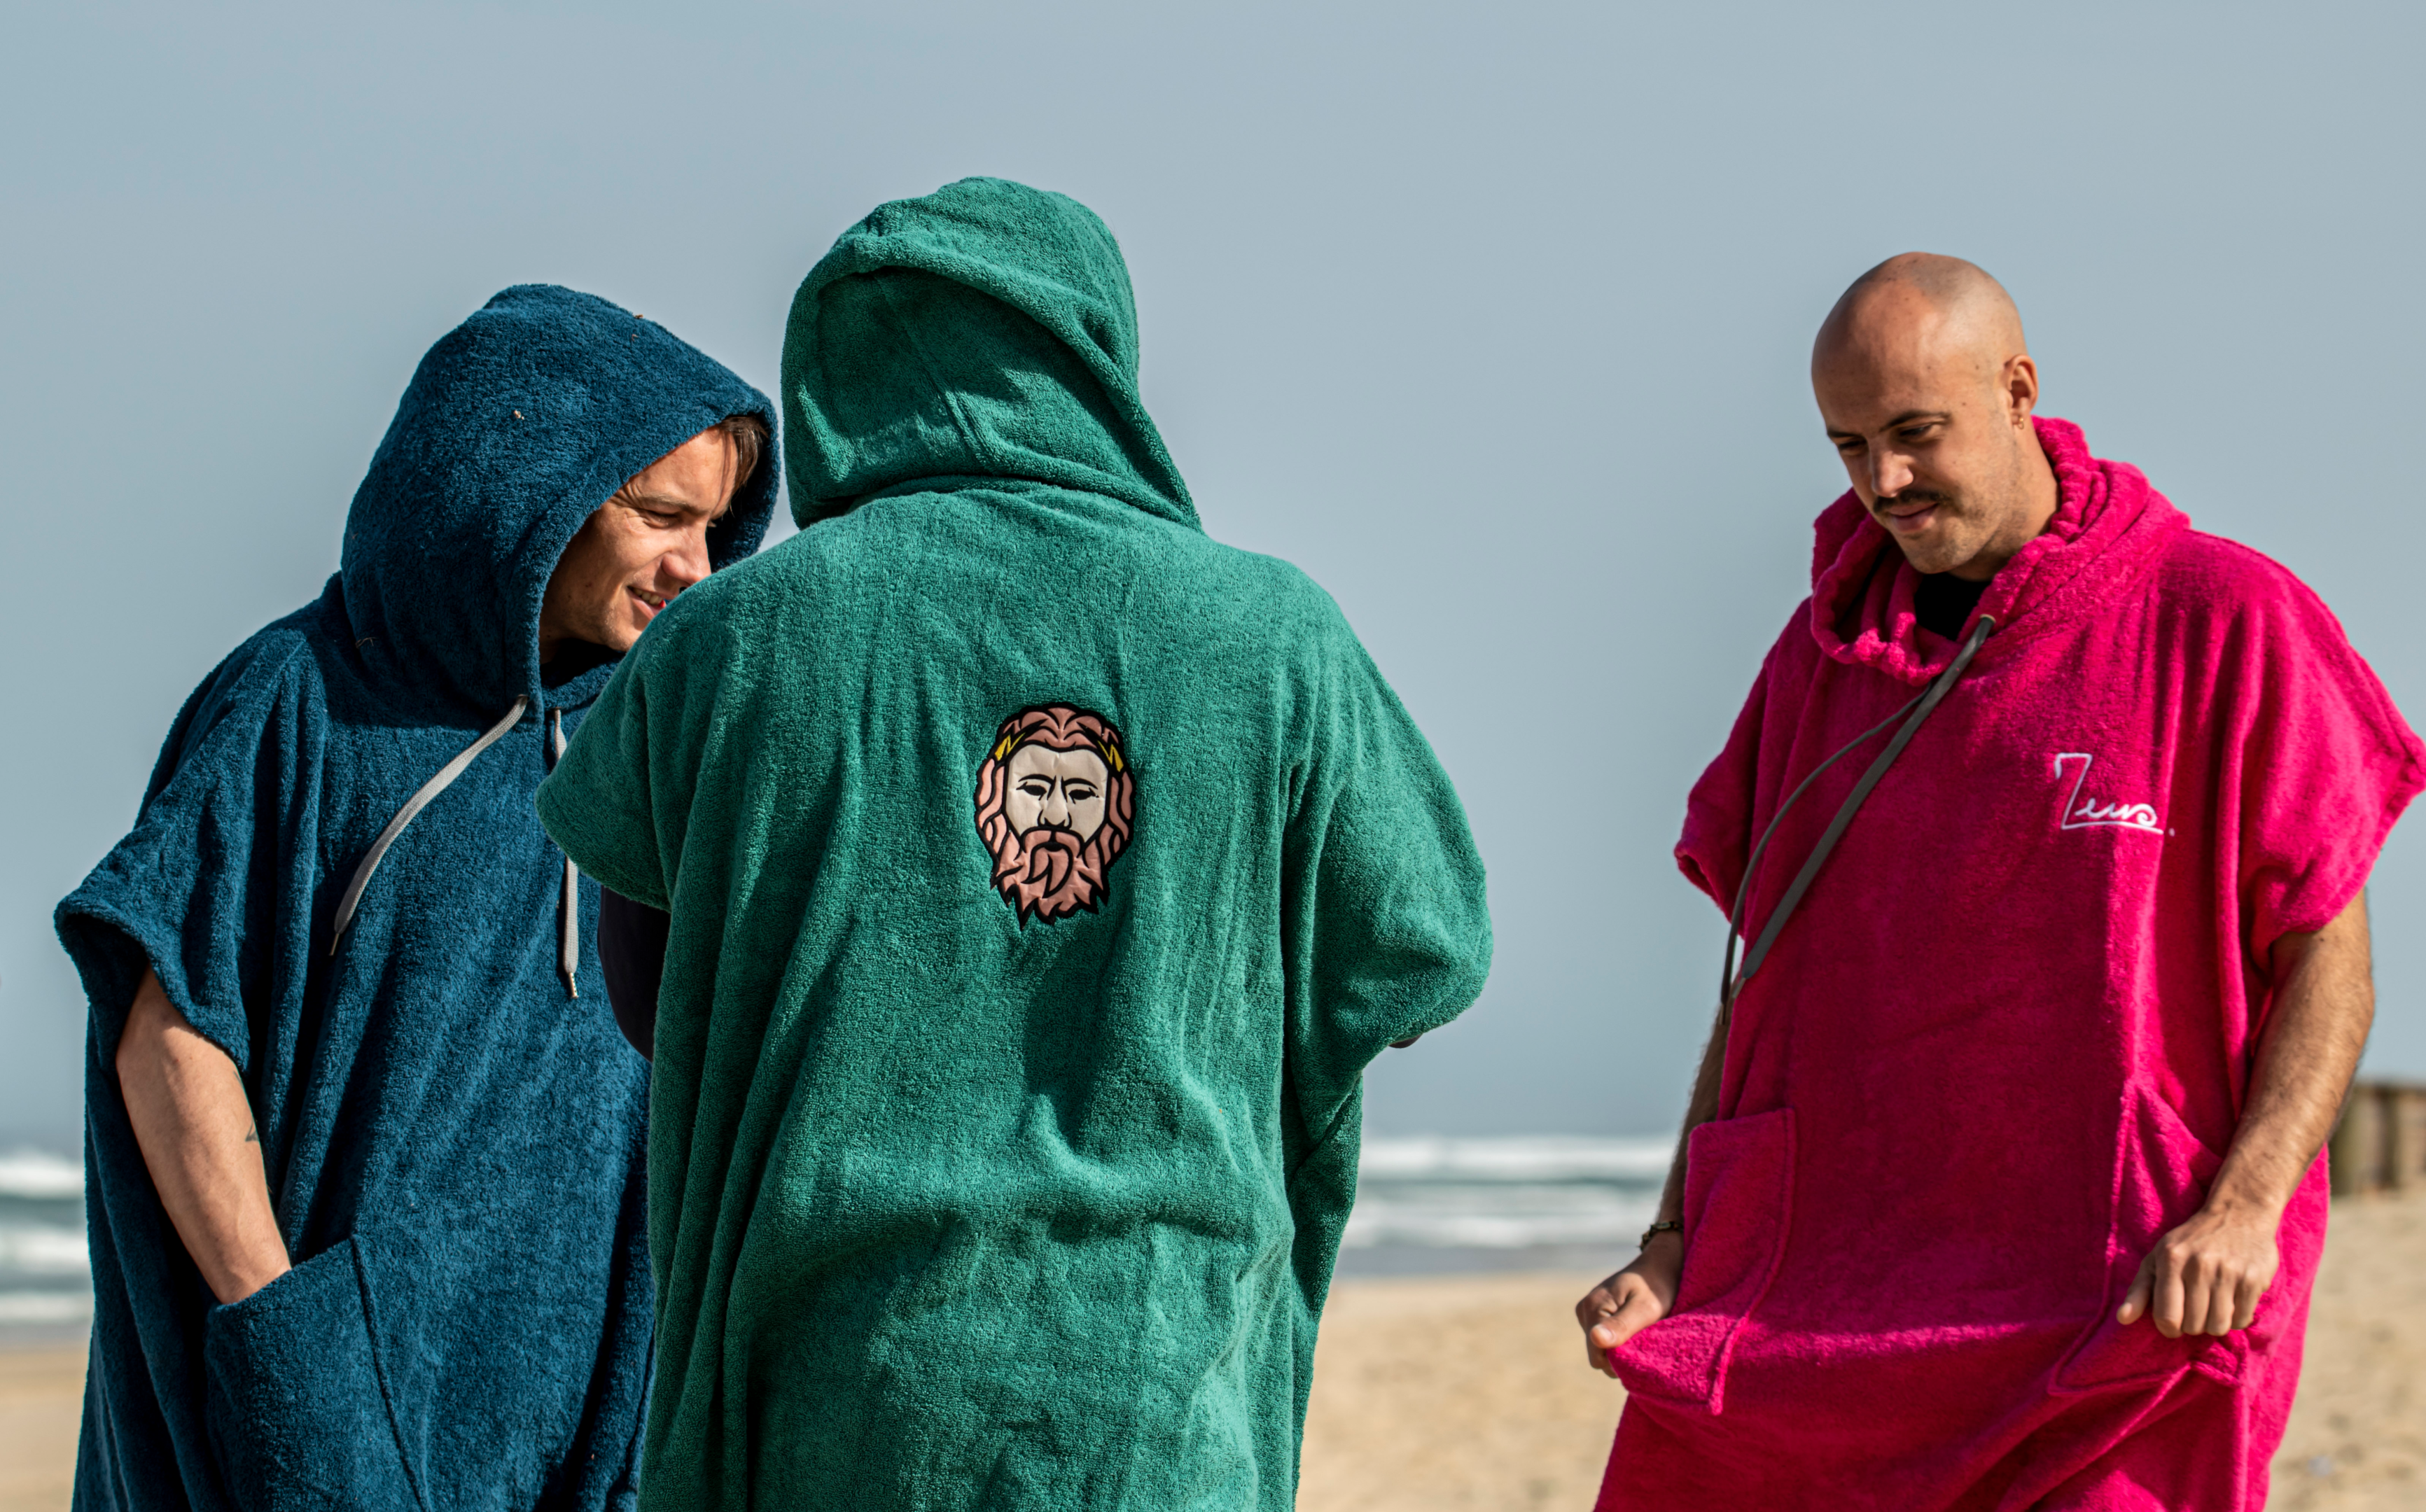 GOTS Cotton Surf Poncho: A GOTS certified organic cotton poncho, respectful of the planet and ultra-comfortable.